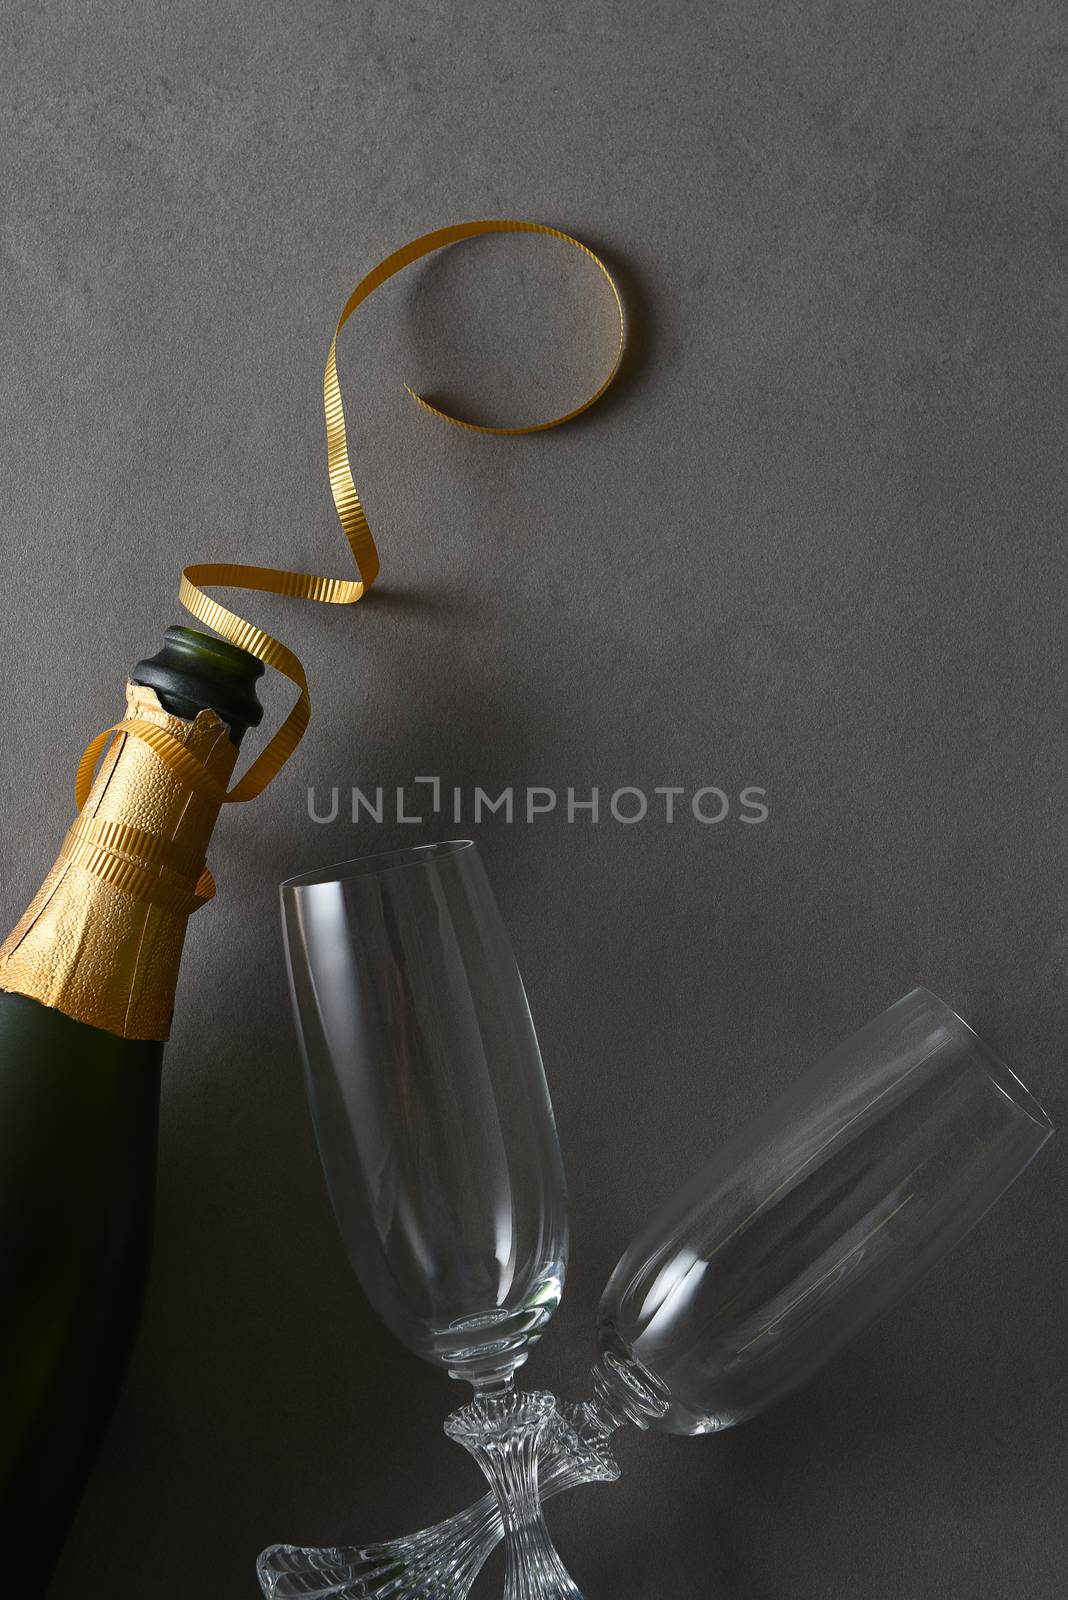 Champagne bottle with god ribbon and two glasses on a gray table.